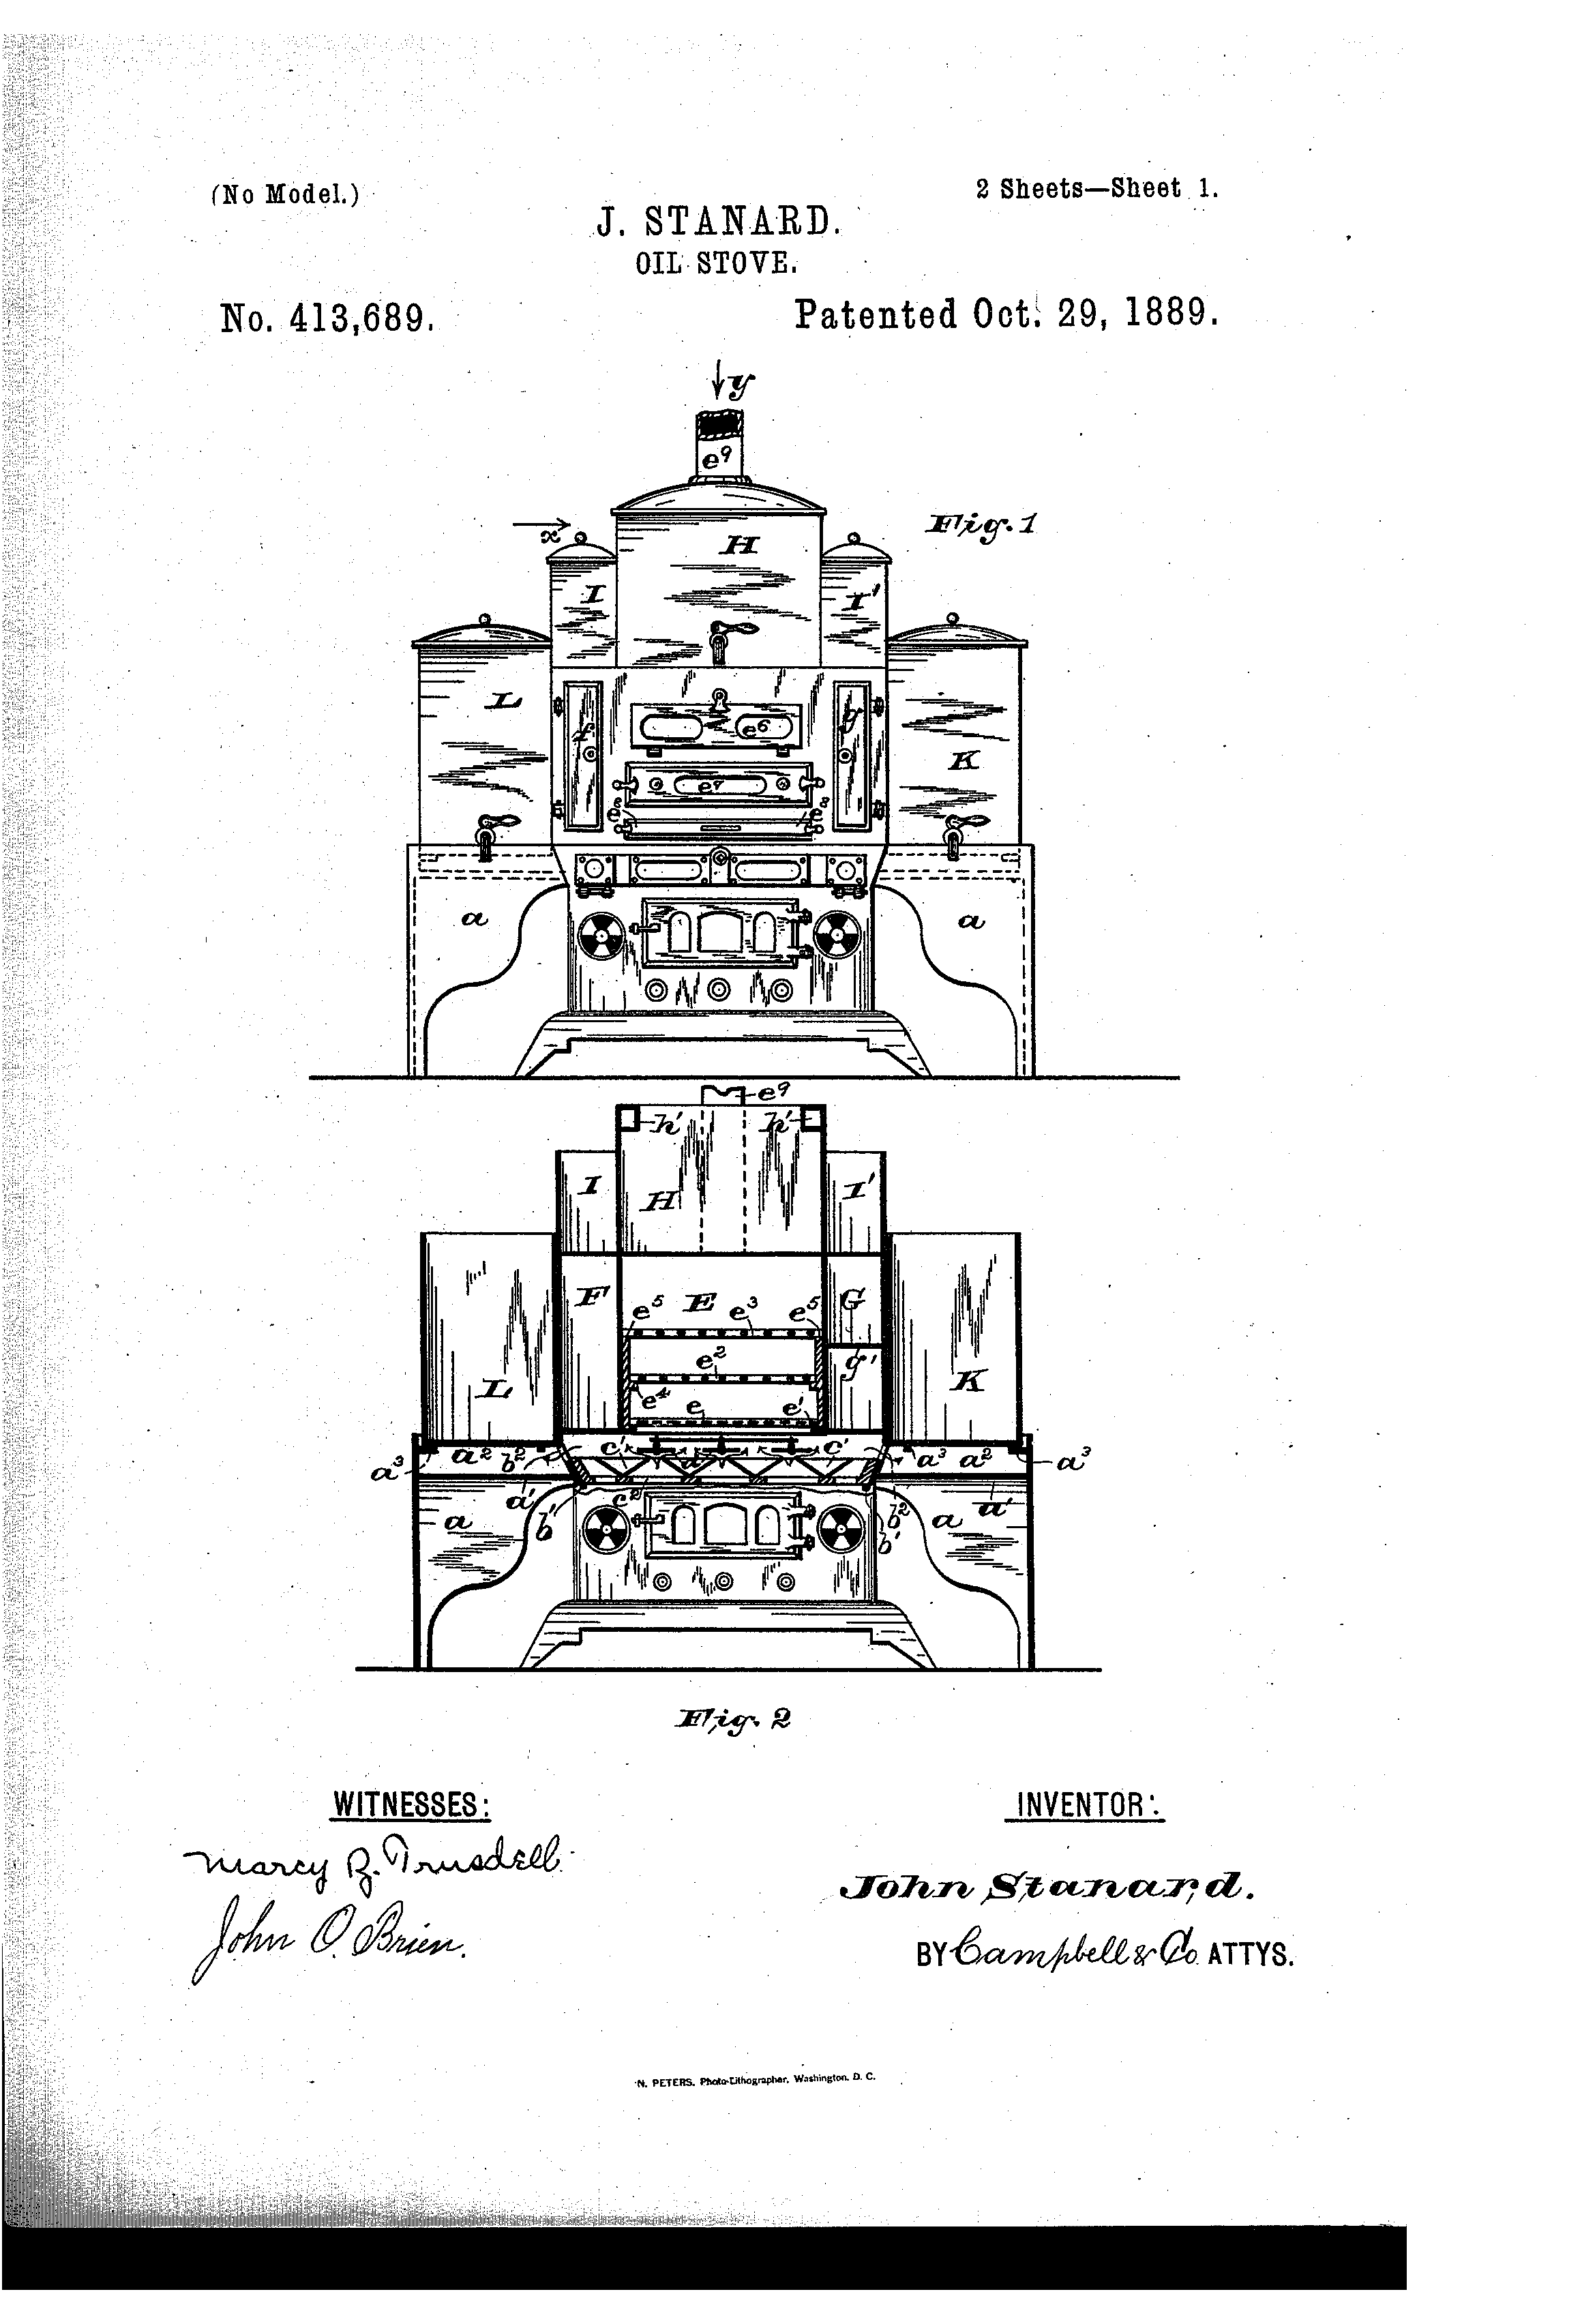 Patent illustration of Stanard's Oil Stove, View 1